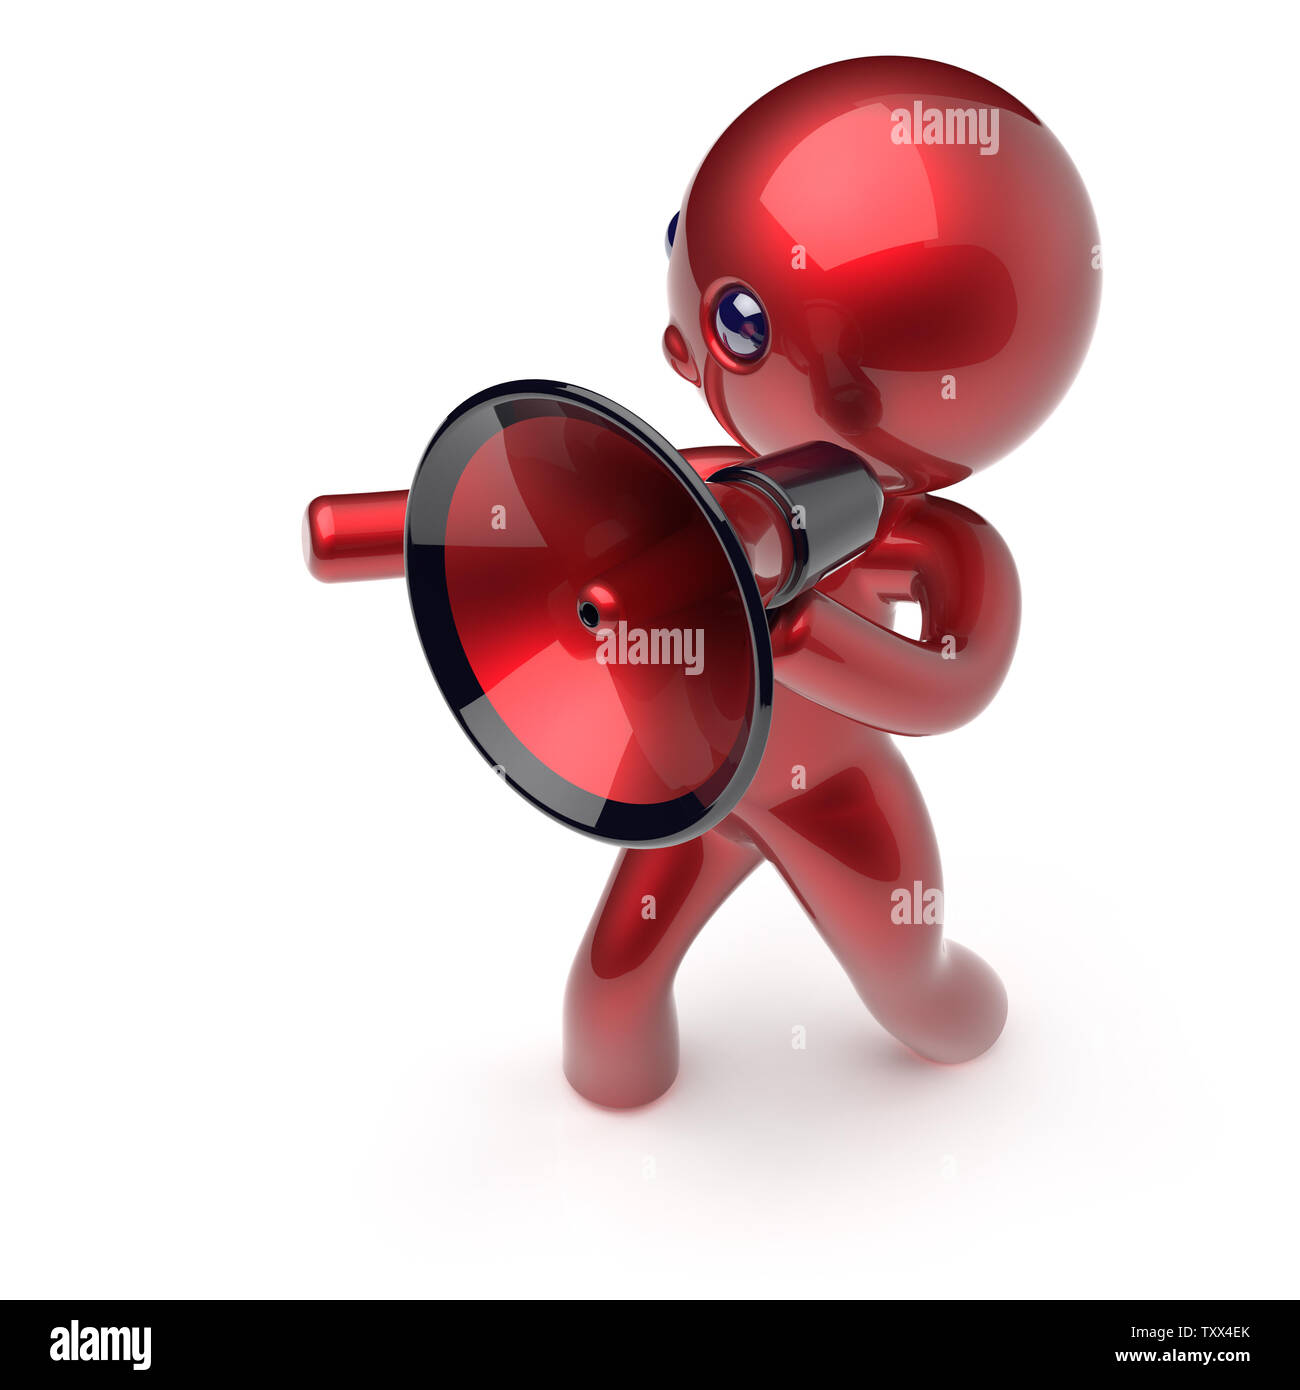 Man megaphone character news making communication announcement red stylized human cartoon guy person speaking people speaker figure icon concept. 3d r Stock Photo